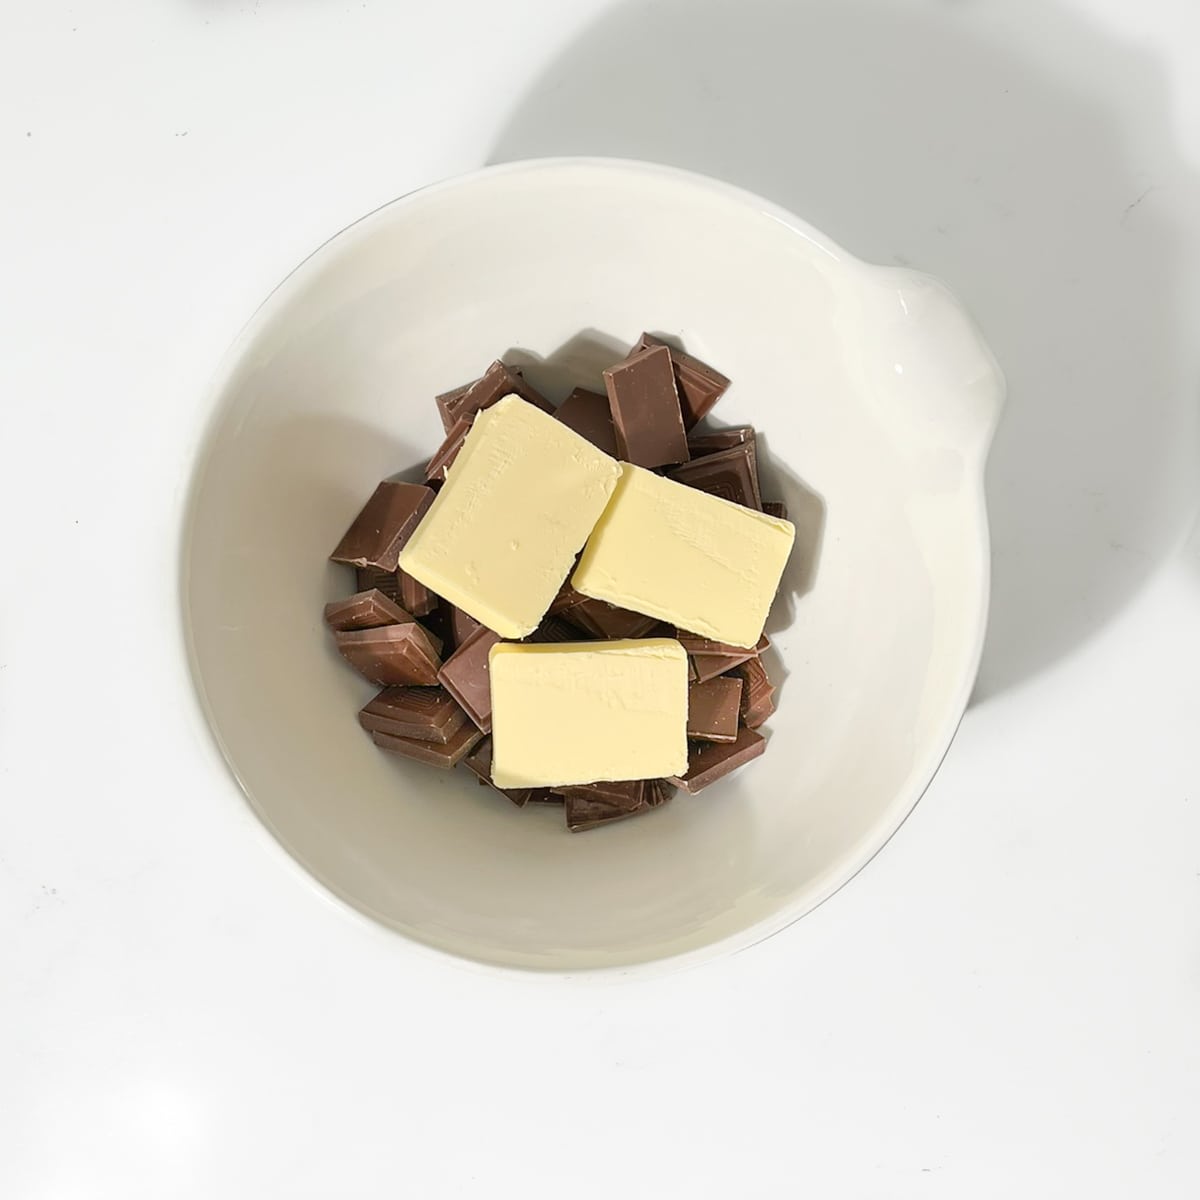 Chocolate and butter in a large white bowl.